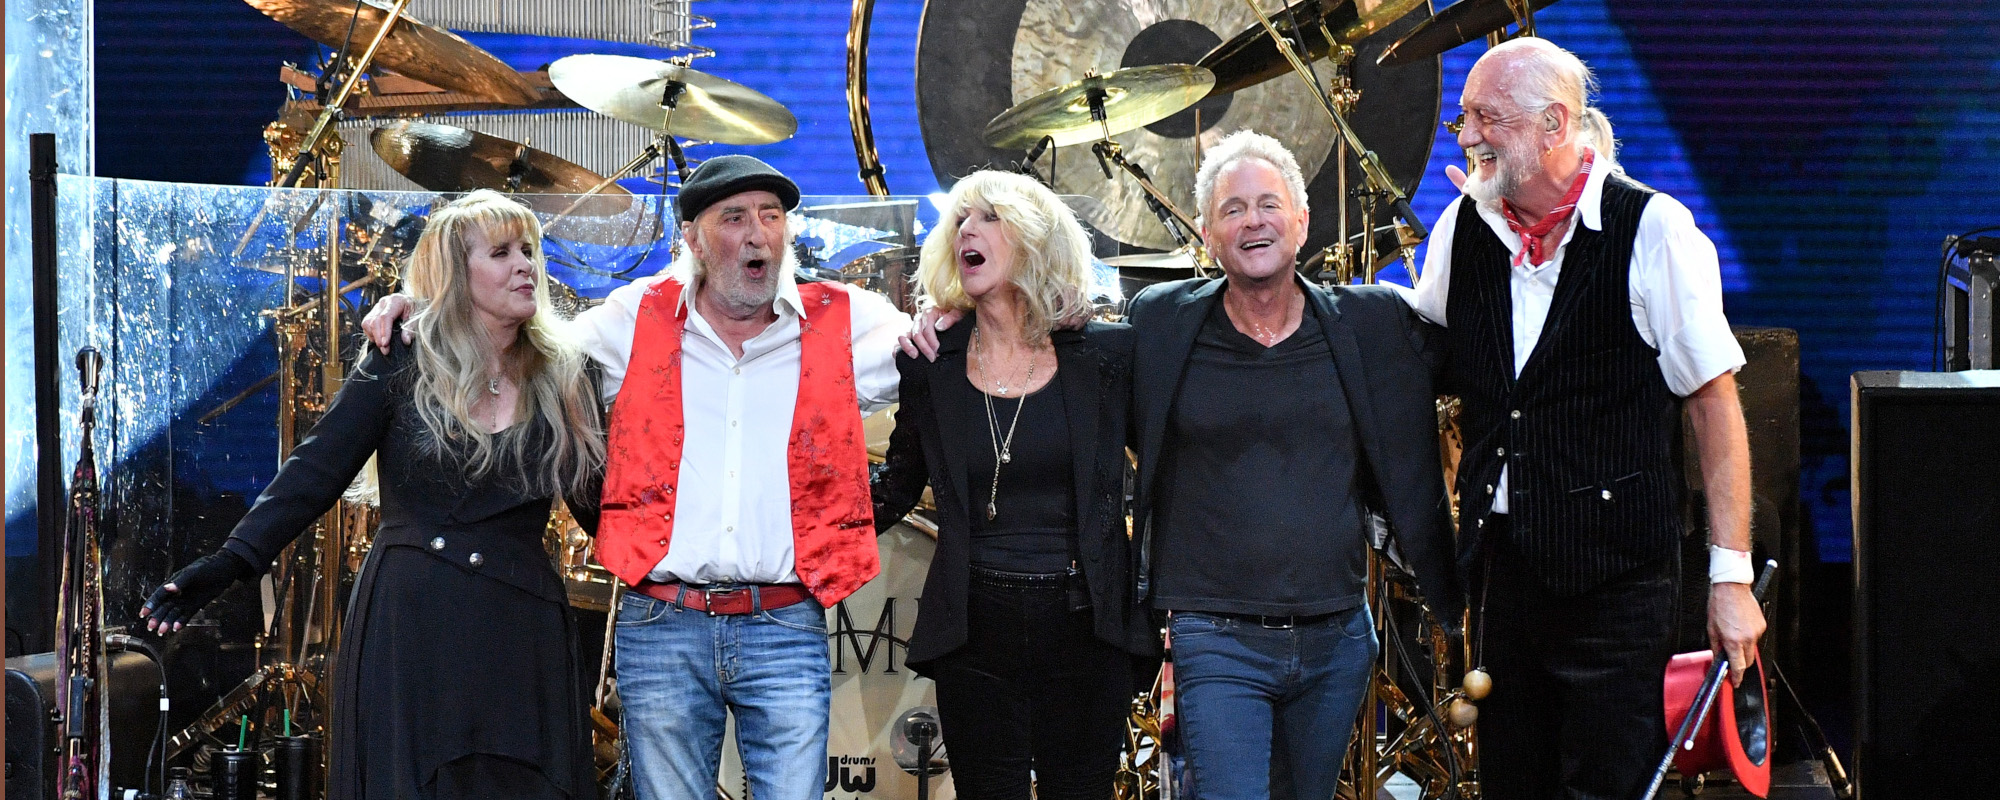 Fleetwood Mac, Duran Duran, Sheryl Crow, and More Respond to Christine McVie’s Death: “We Cherished Christine Deeply”